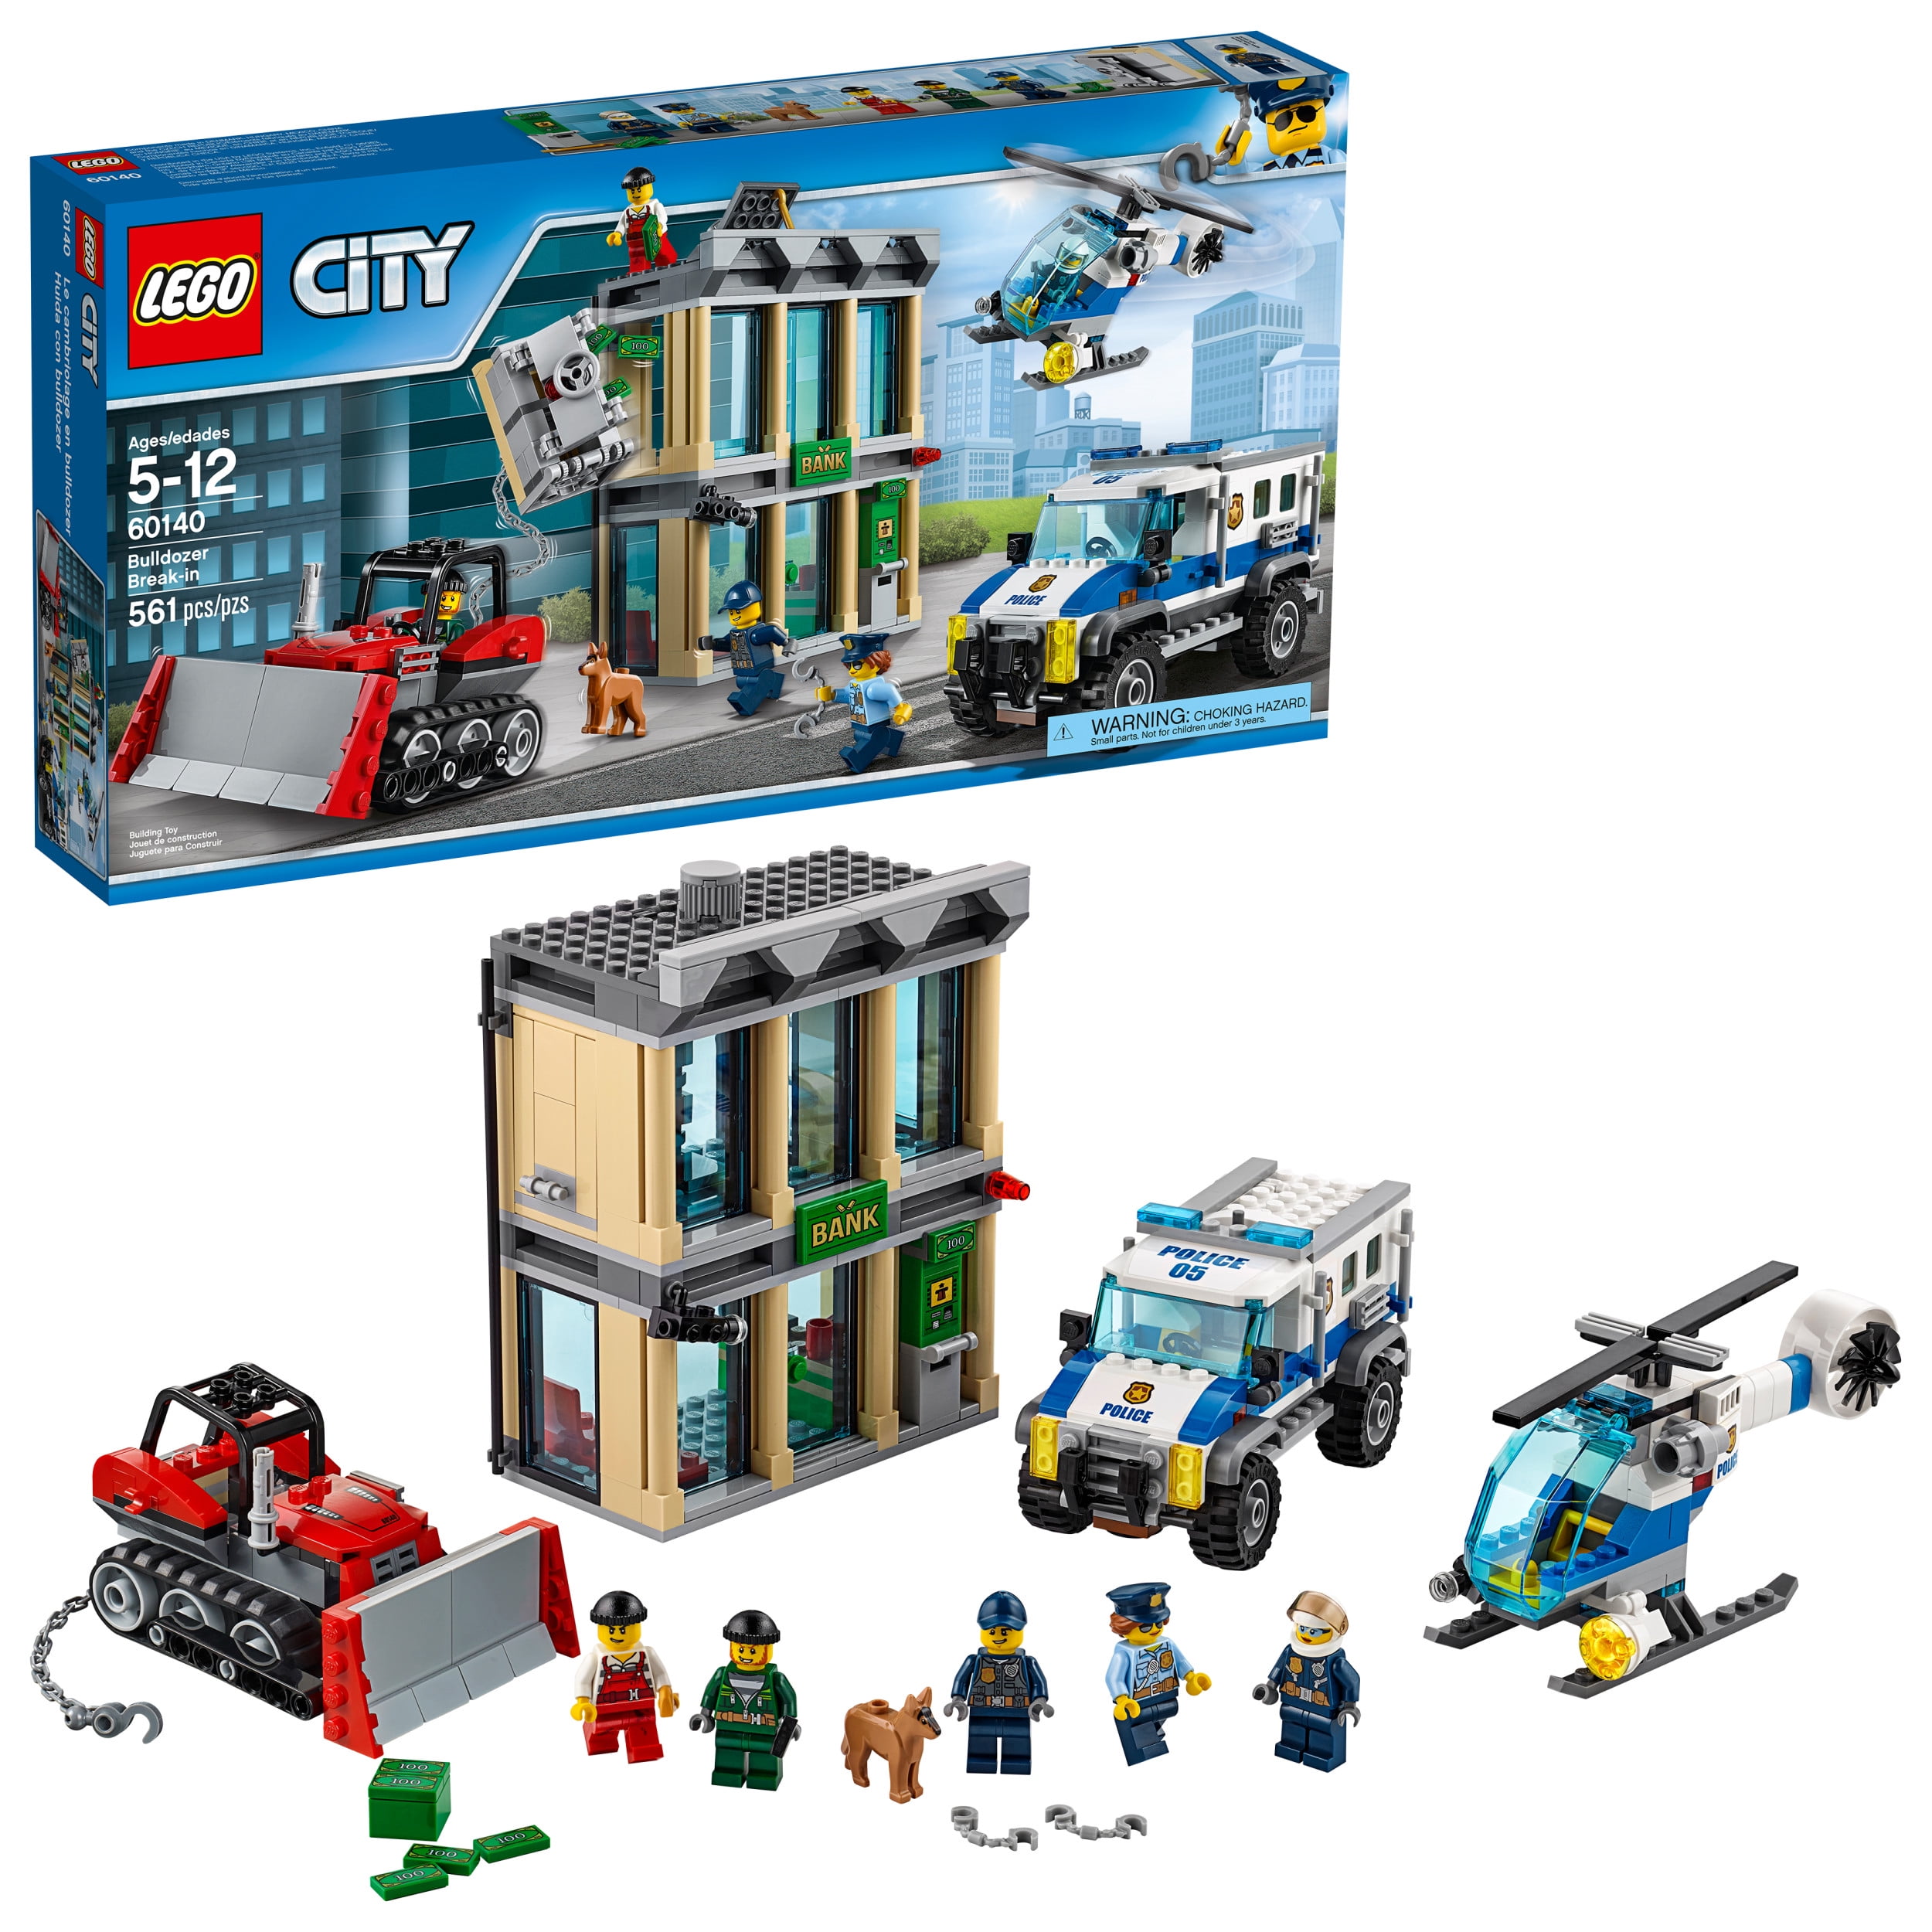 NEW IN BOX KIT #60119 2016 FERRY Details about   LEGO 301 PIECES CITY 